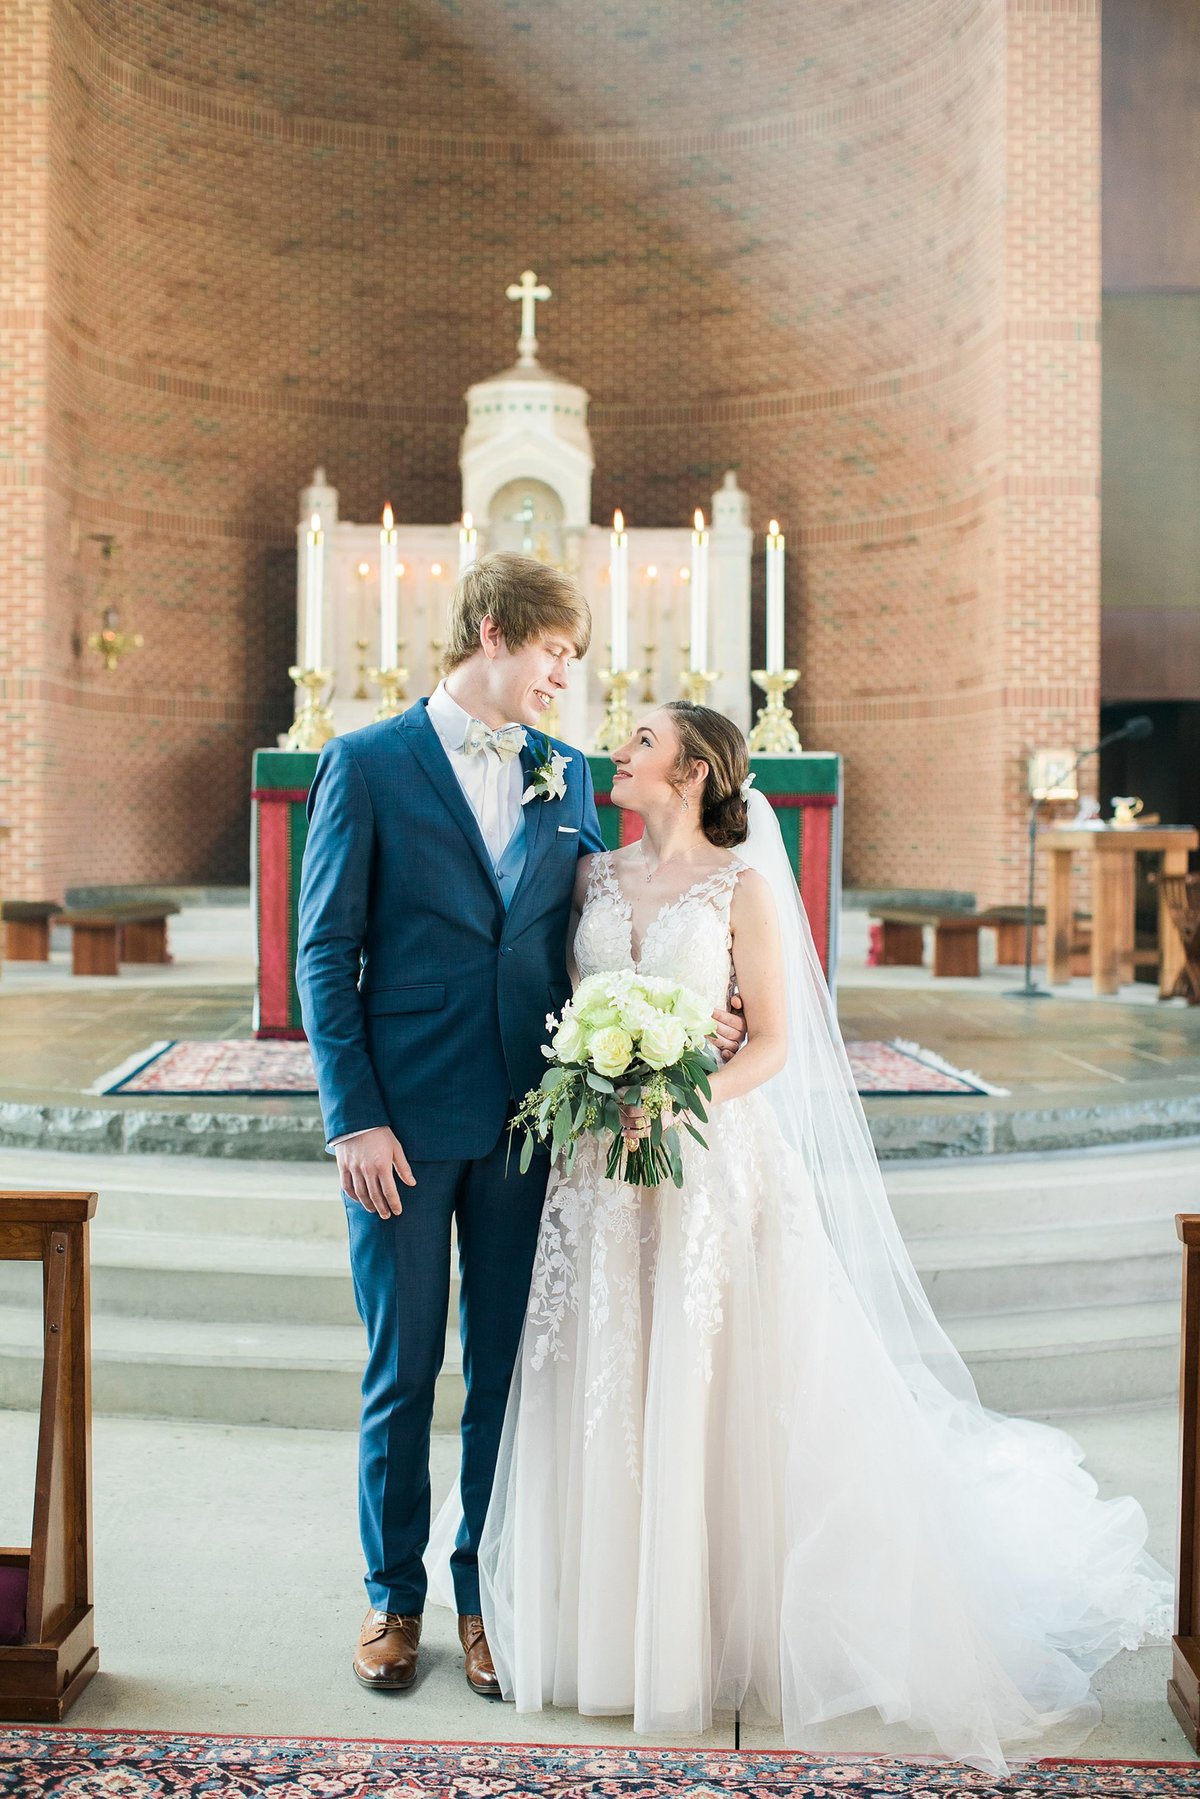 Wedding Photographer, couple standing together inside church